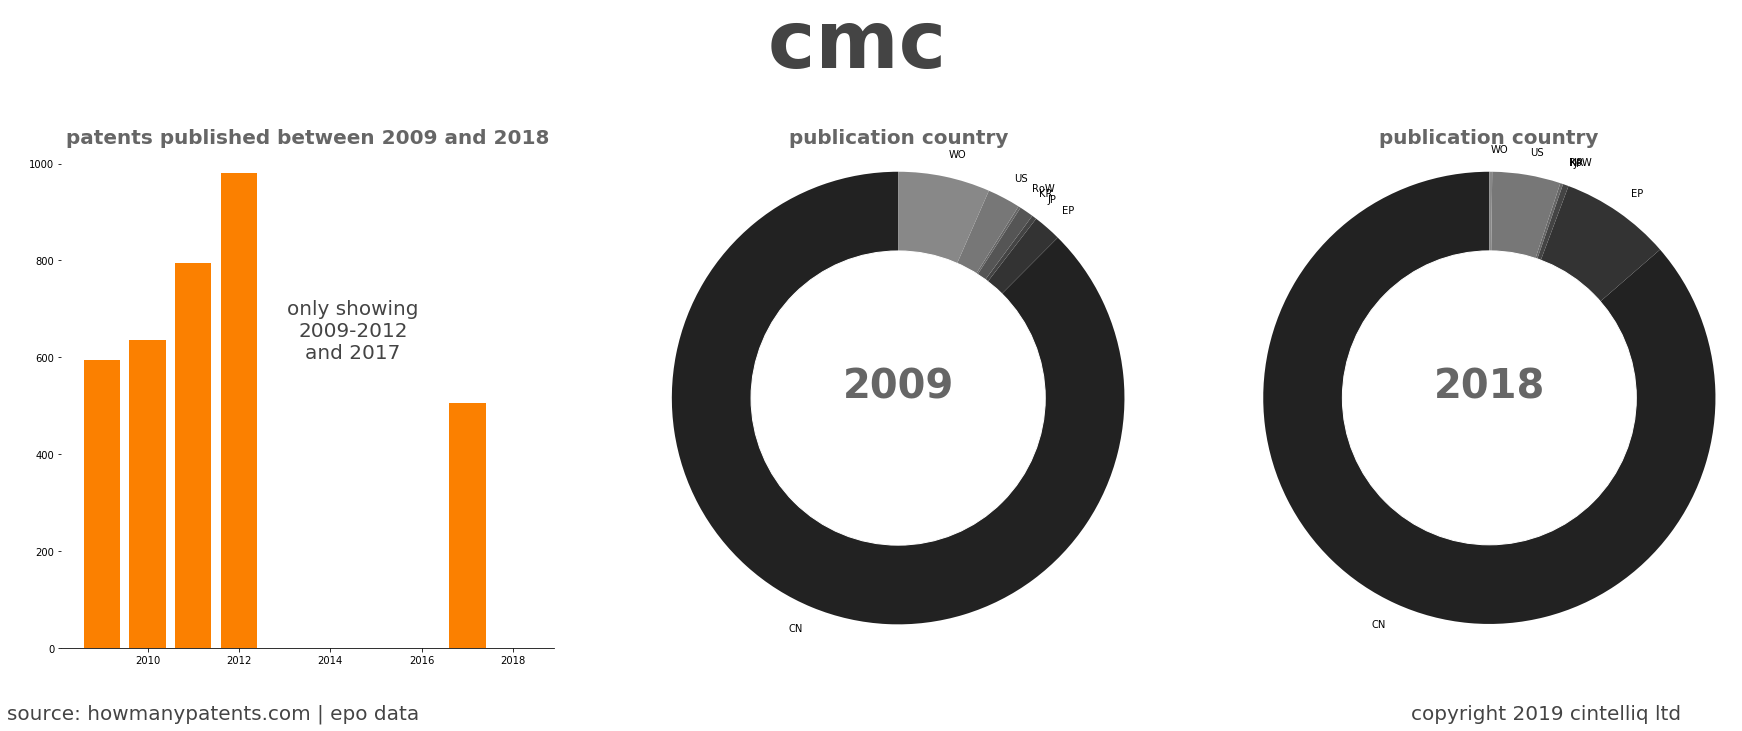 summary of patents for Cmc 